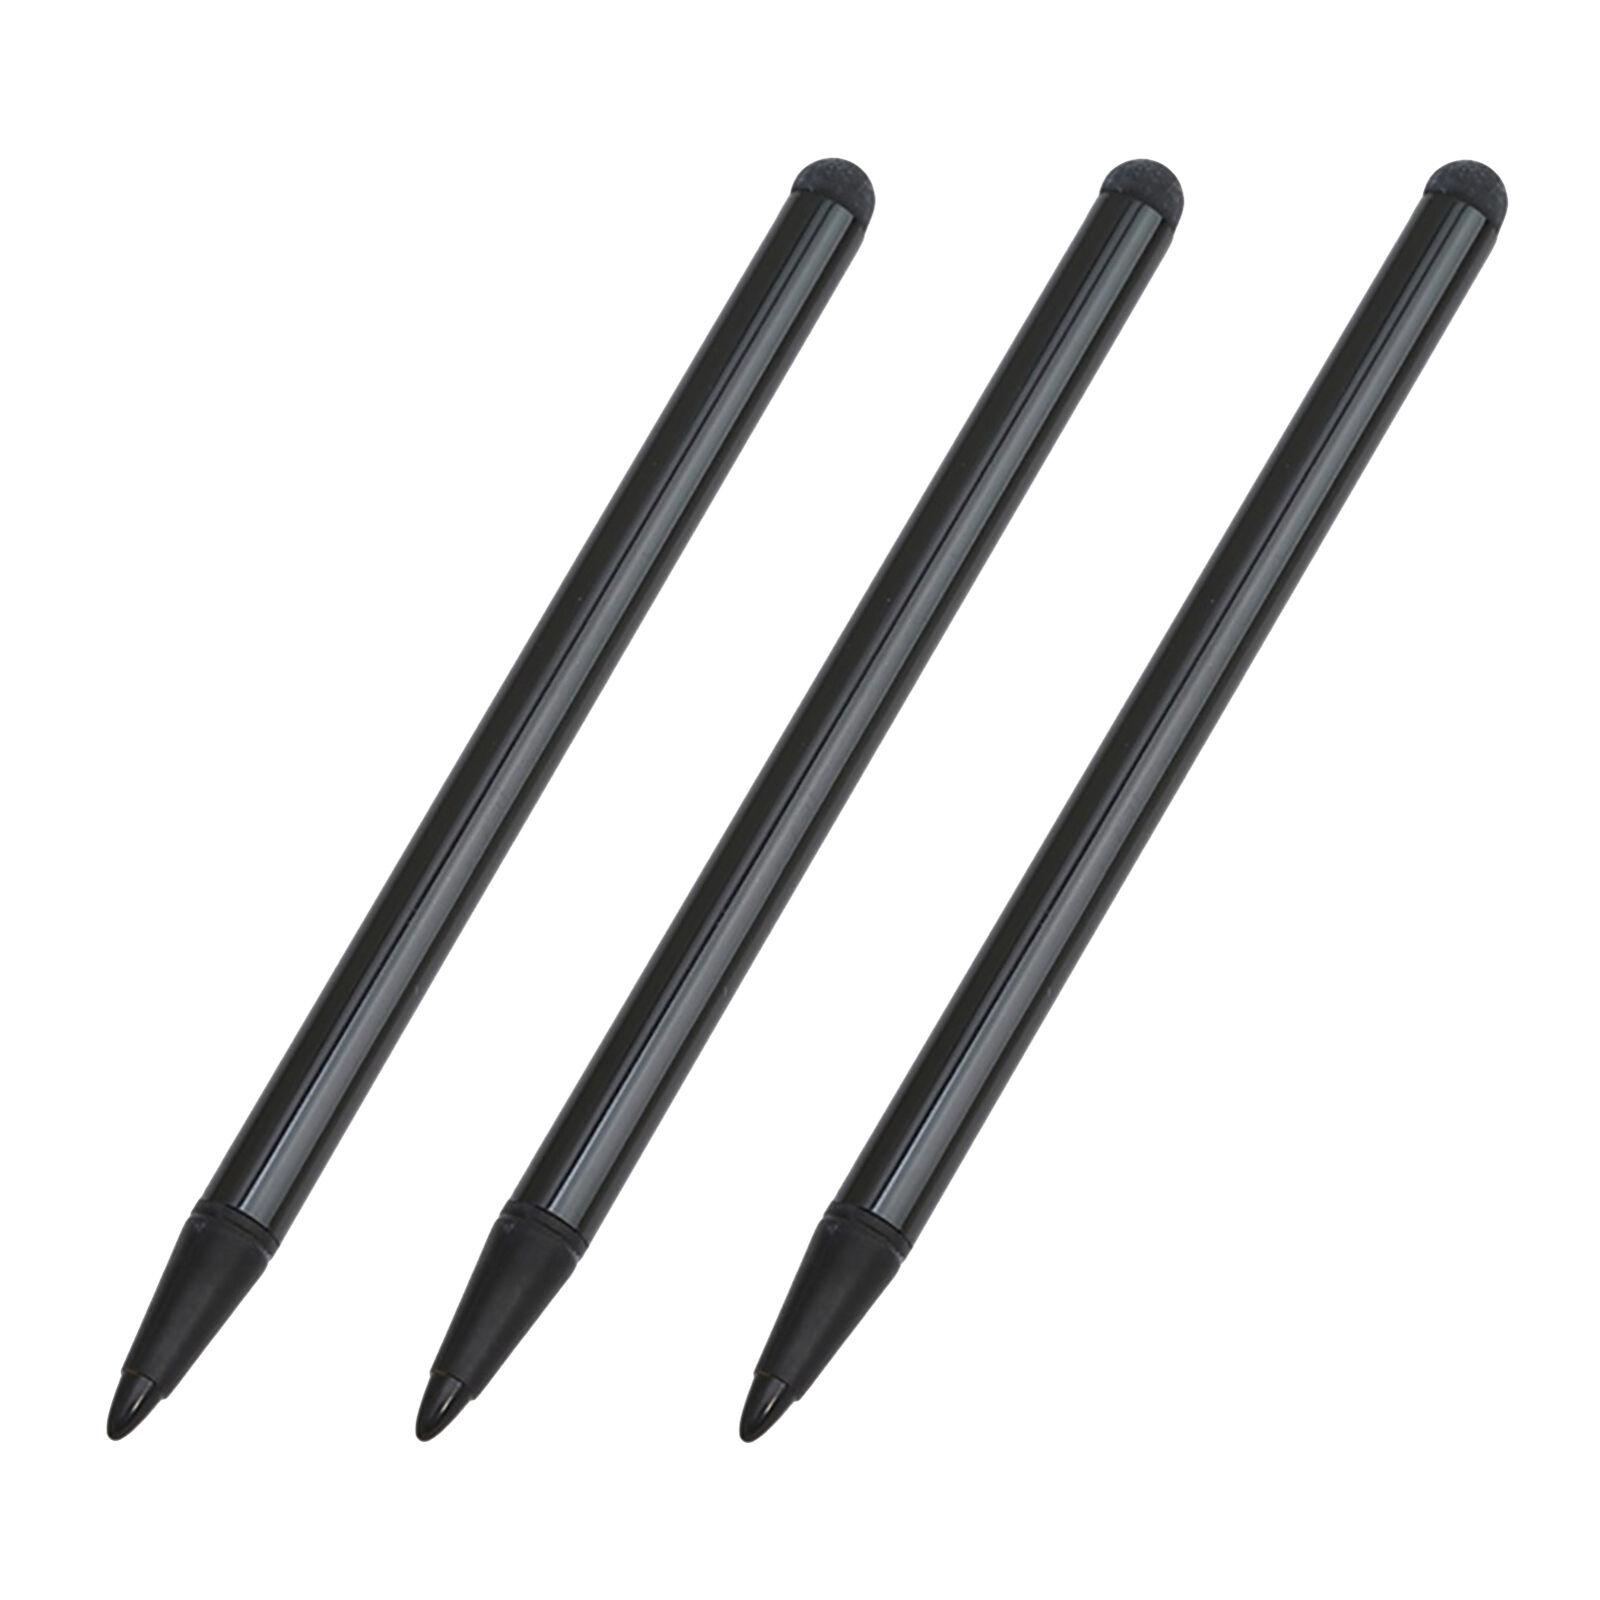 3pcs Smart Digital Pen for Touch Screen Tablet Capacitive Stylist Pen Cell Phone